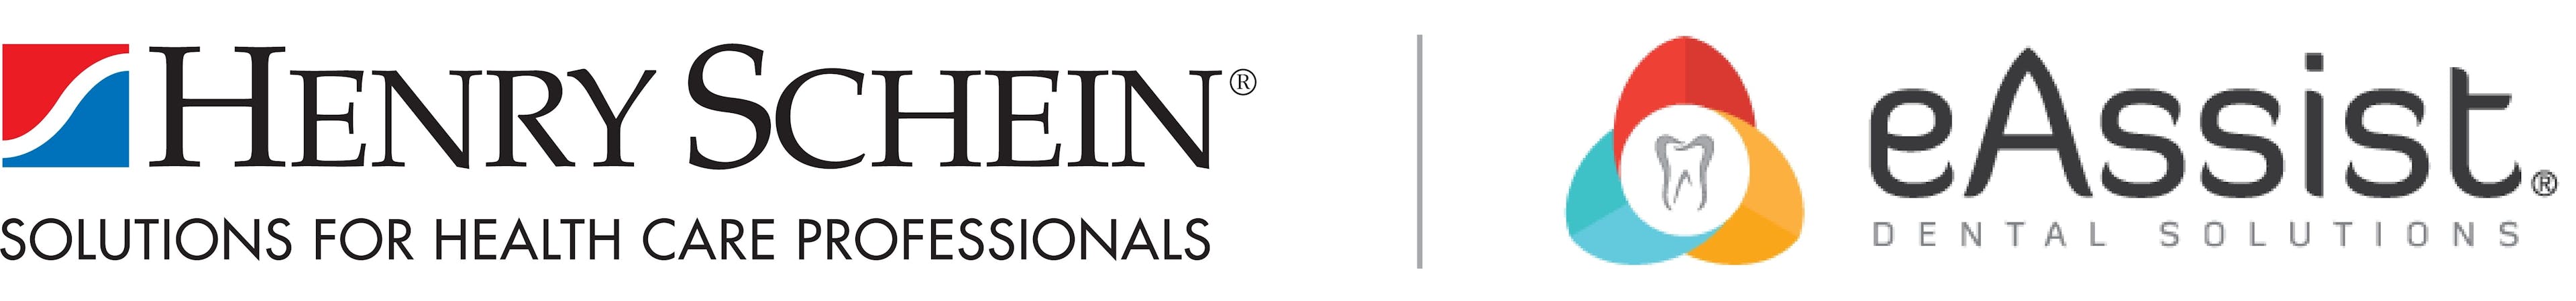 Henry Schein Announces Majority Ownership of eAssist Dental Solutions